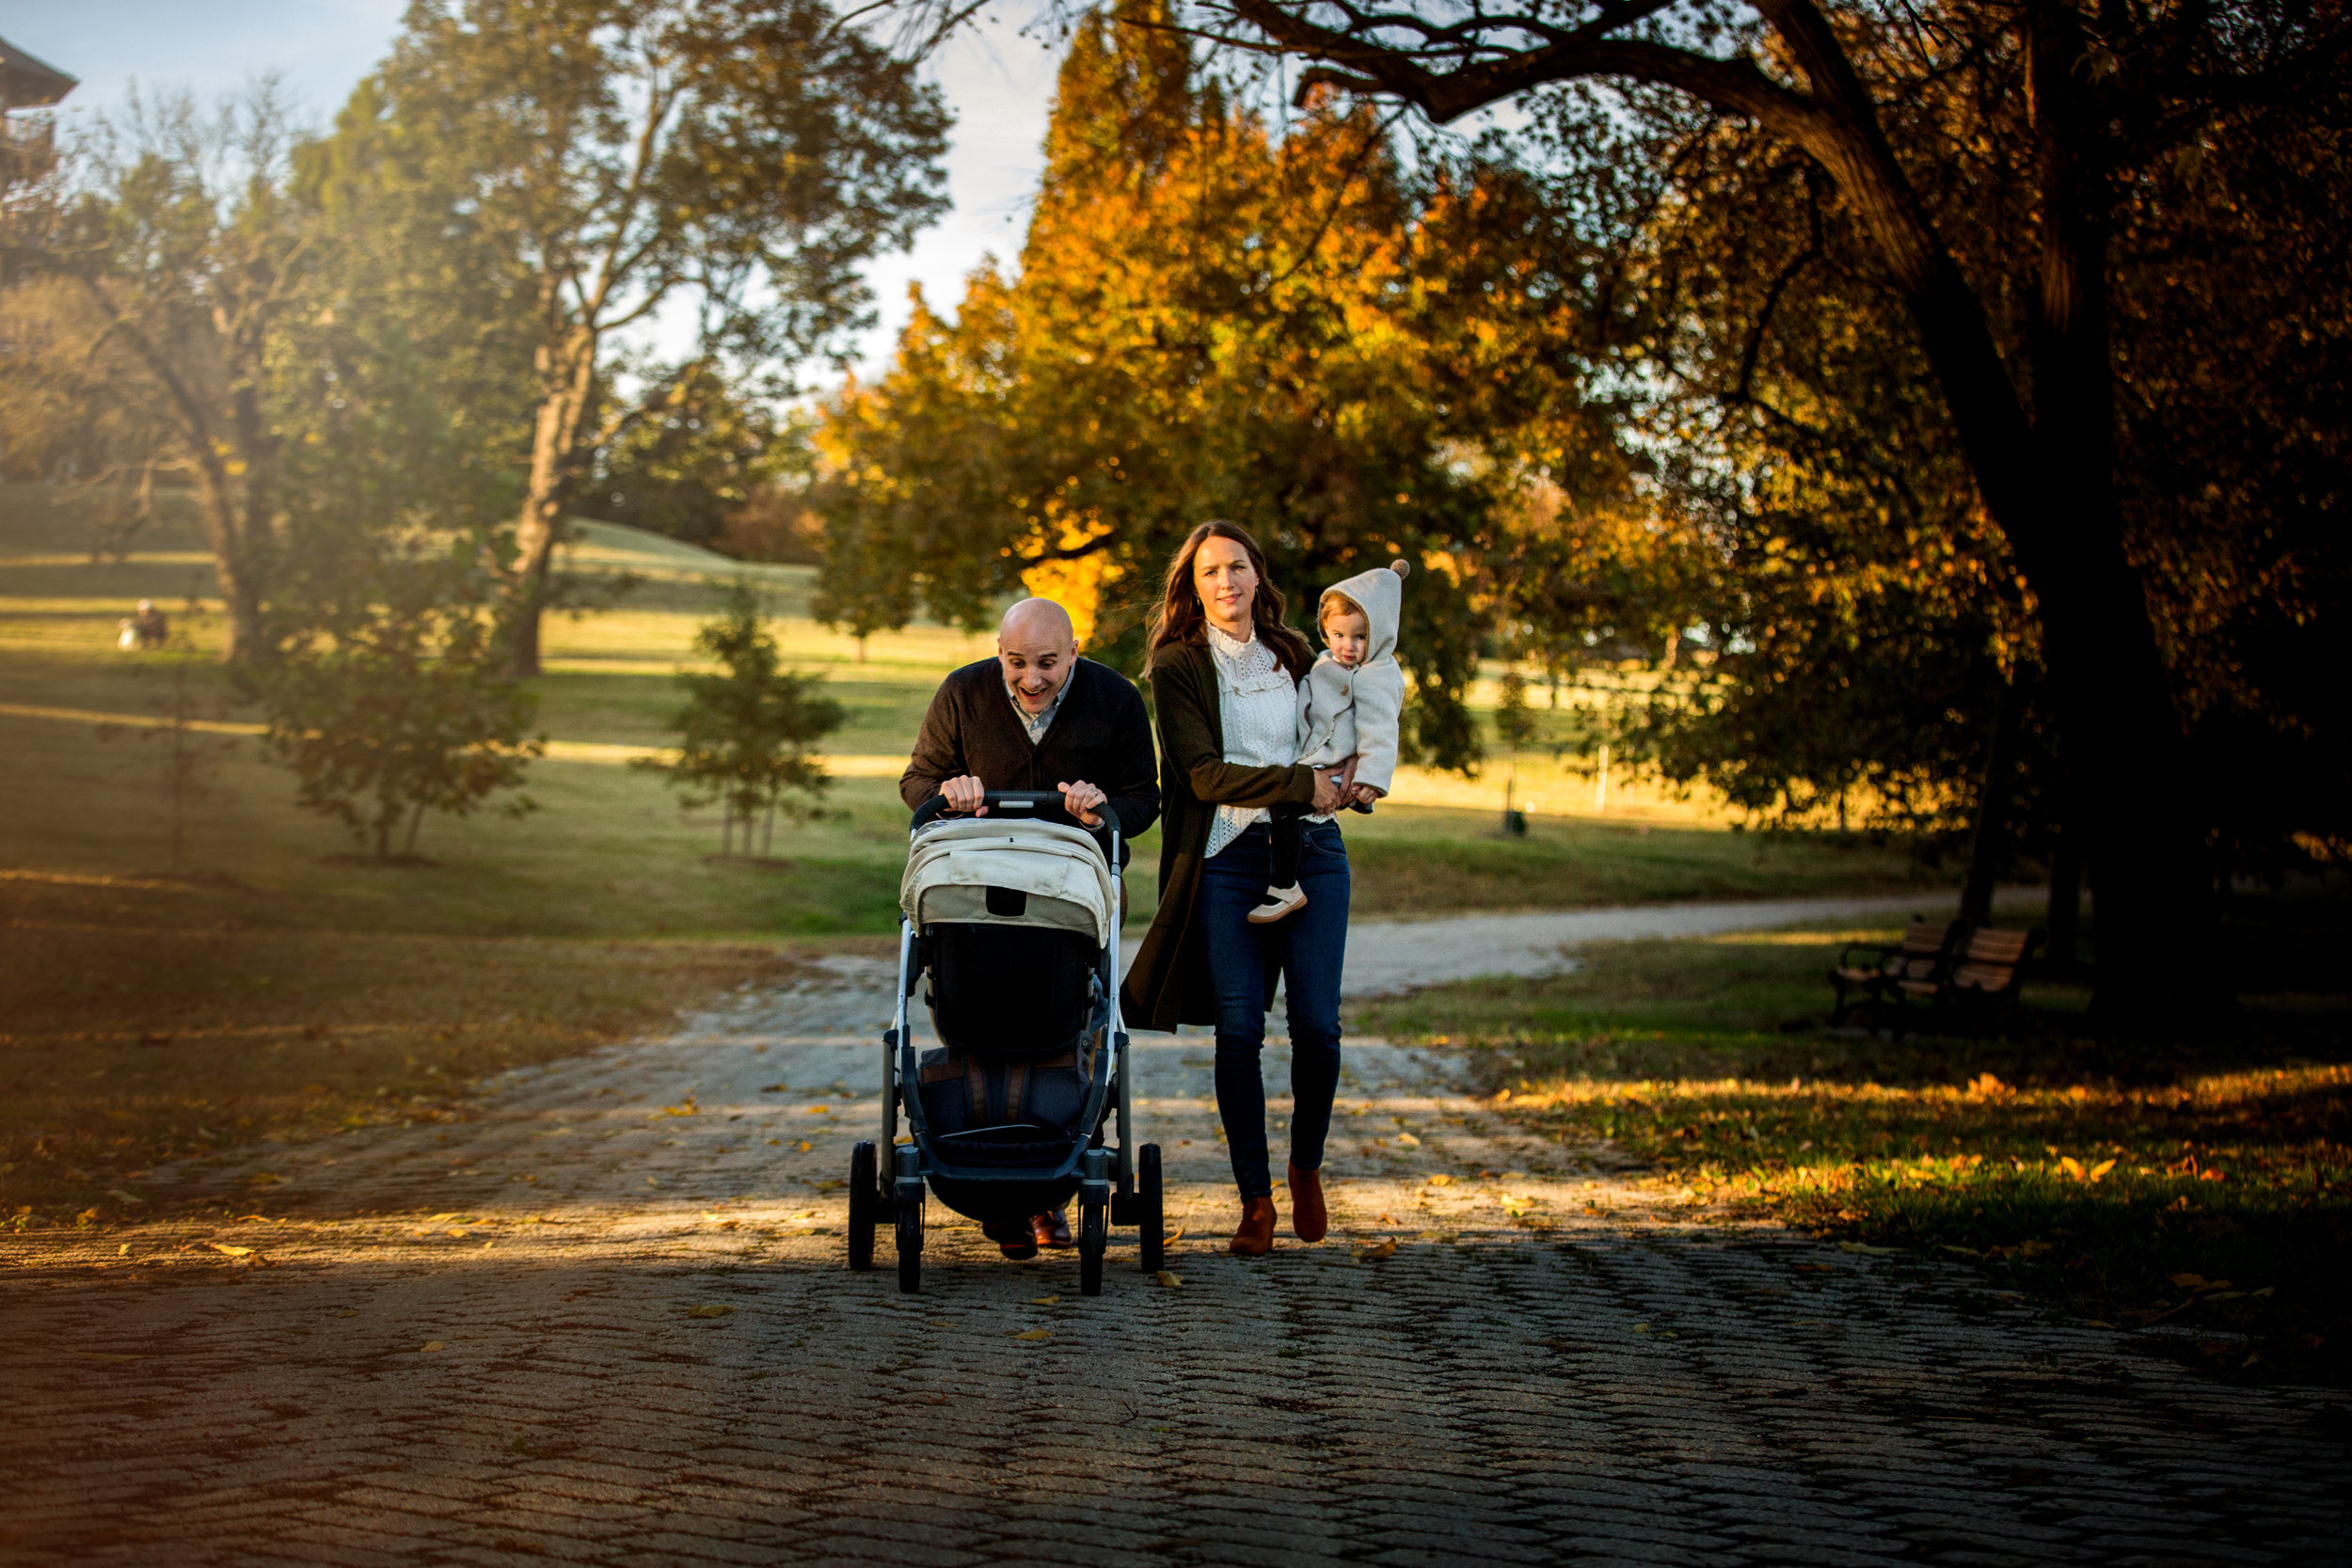 family of four with stroller walking through Baltimore park path in fall